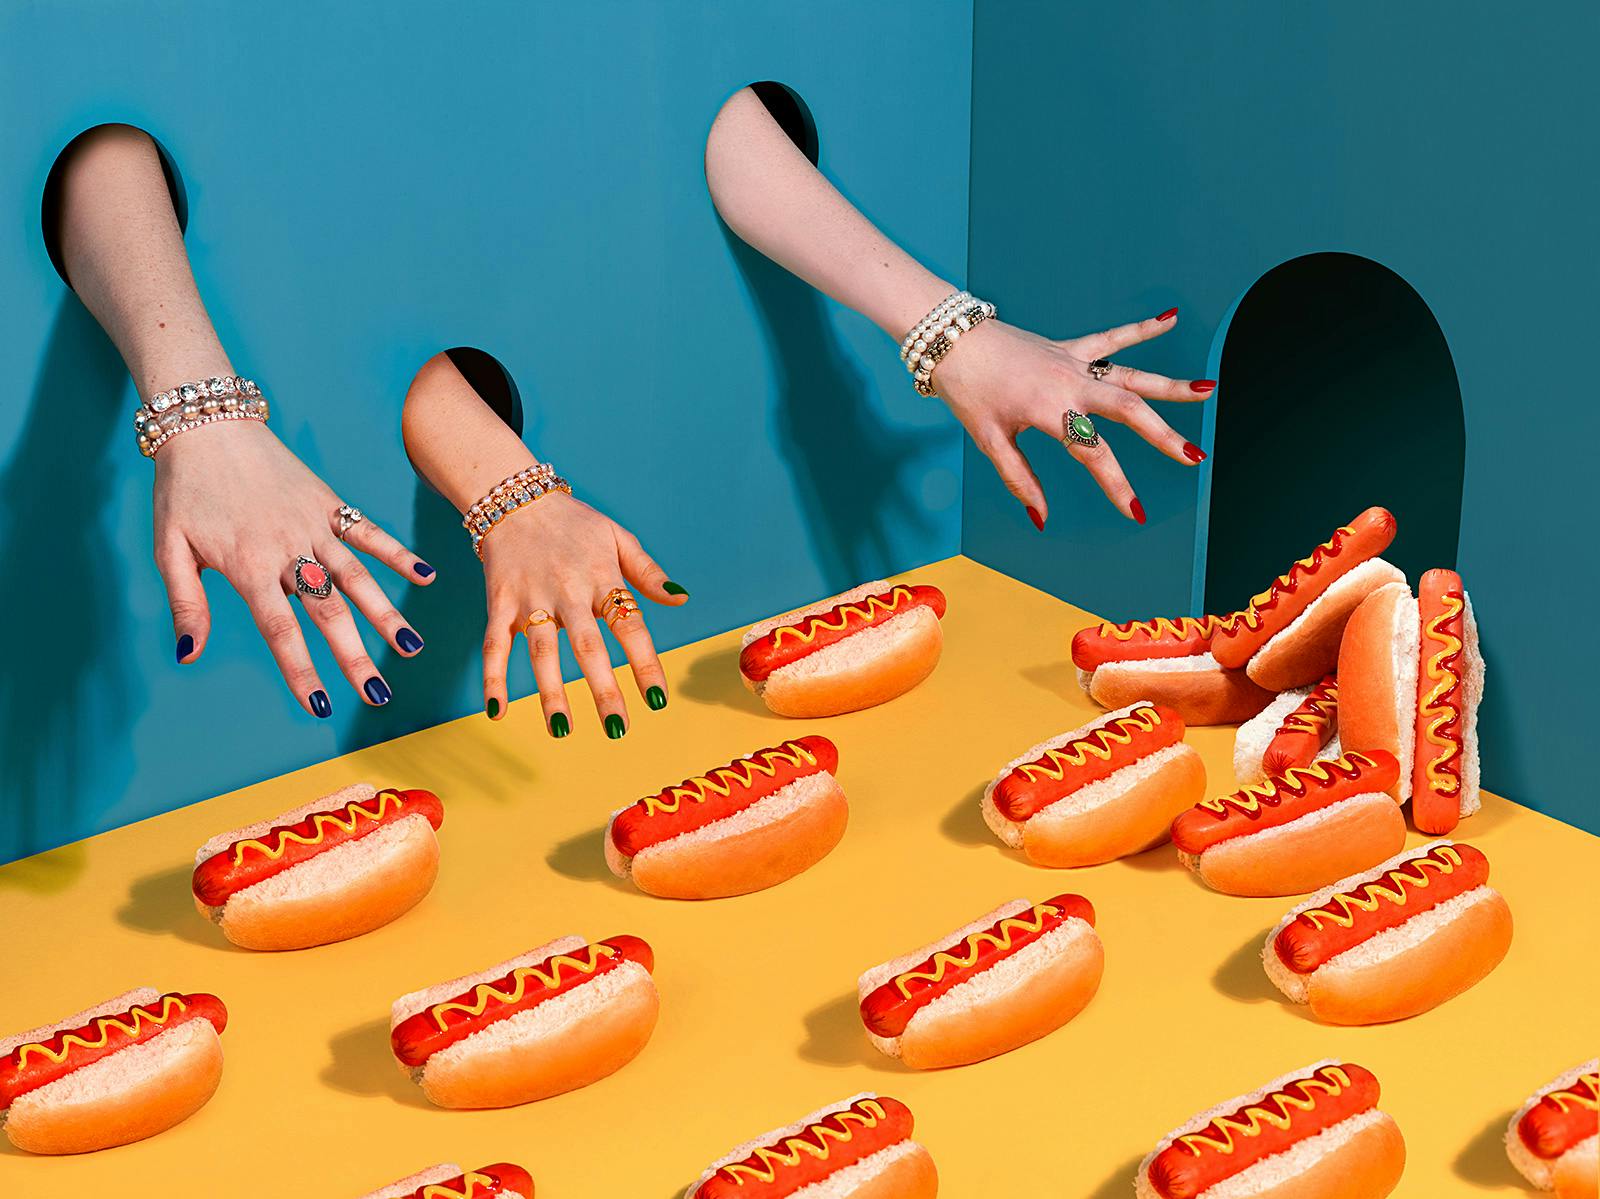 hands poking in through holes reaching for a pile up of hotdogs with mustard